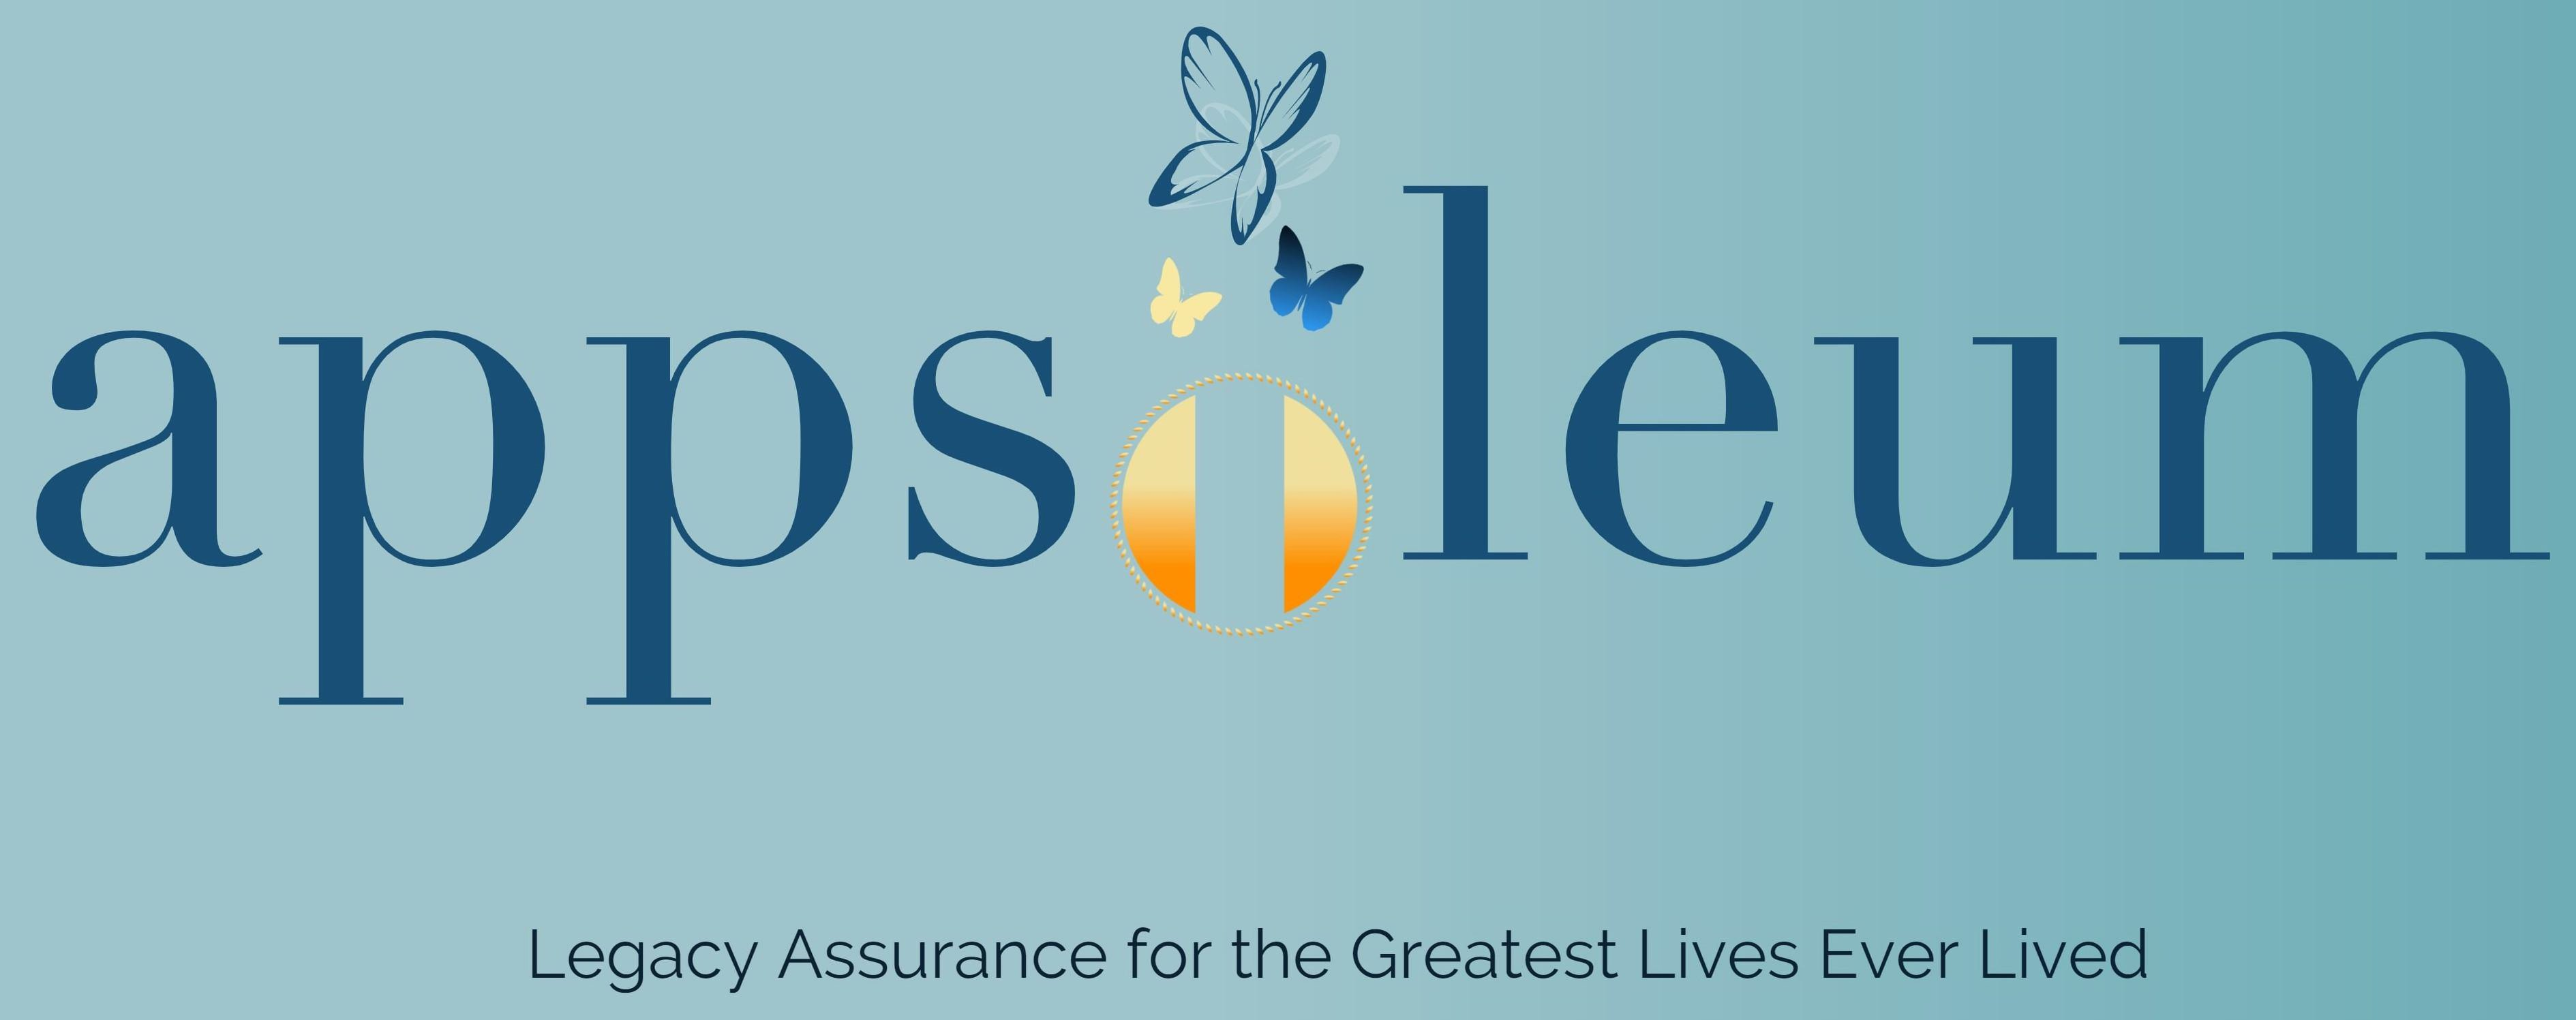  LEGACY ASSURANCE FOR THE GREATEST LIVES EVER LIVED